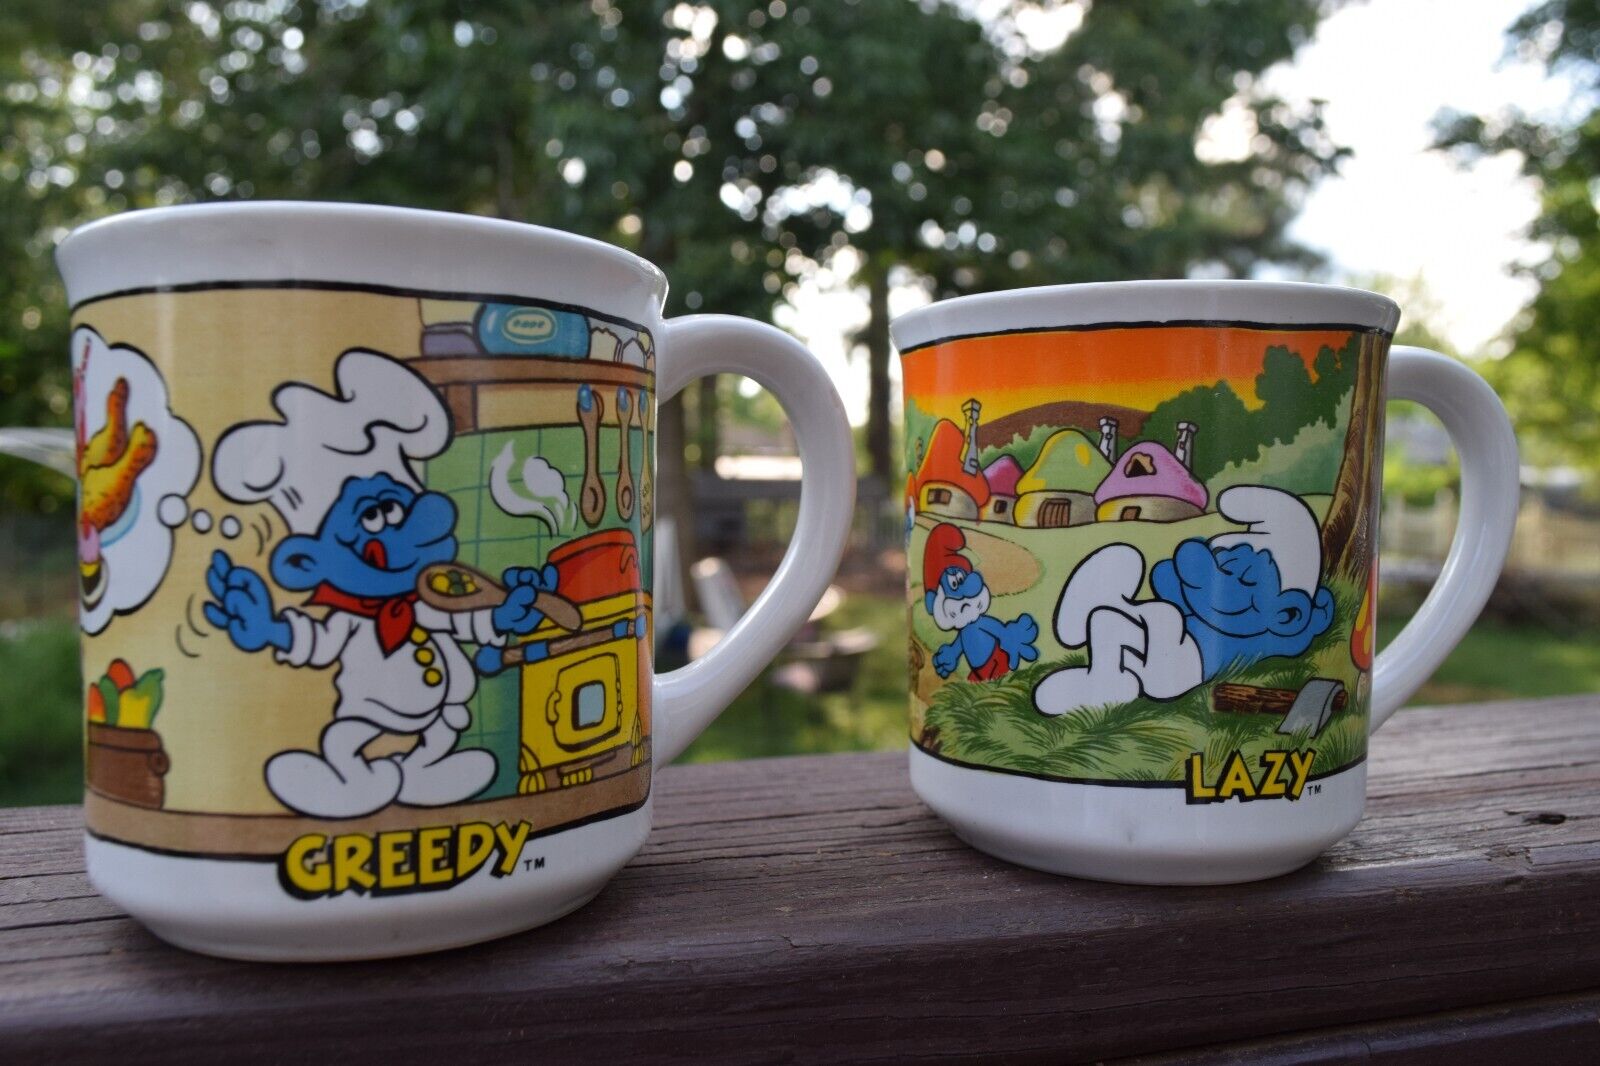 Vintage 1982 Smurfs Ceramic Collectables -LAZY GREEDY Mug - Wallace Berrie & Co